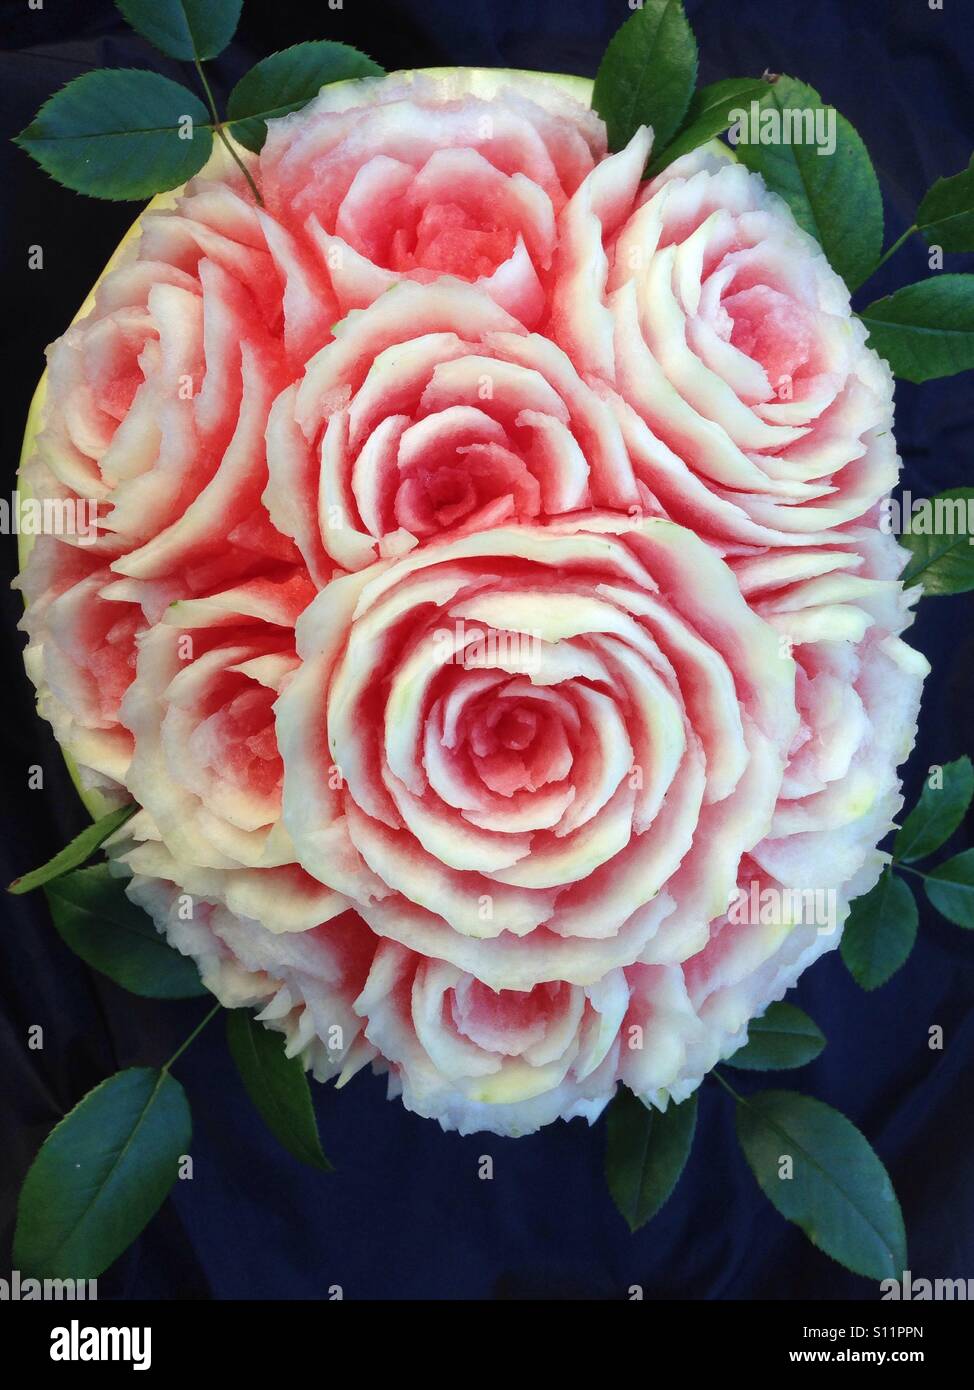 Fruit carving of roses using a watermelon Stock Photo